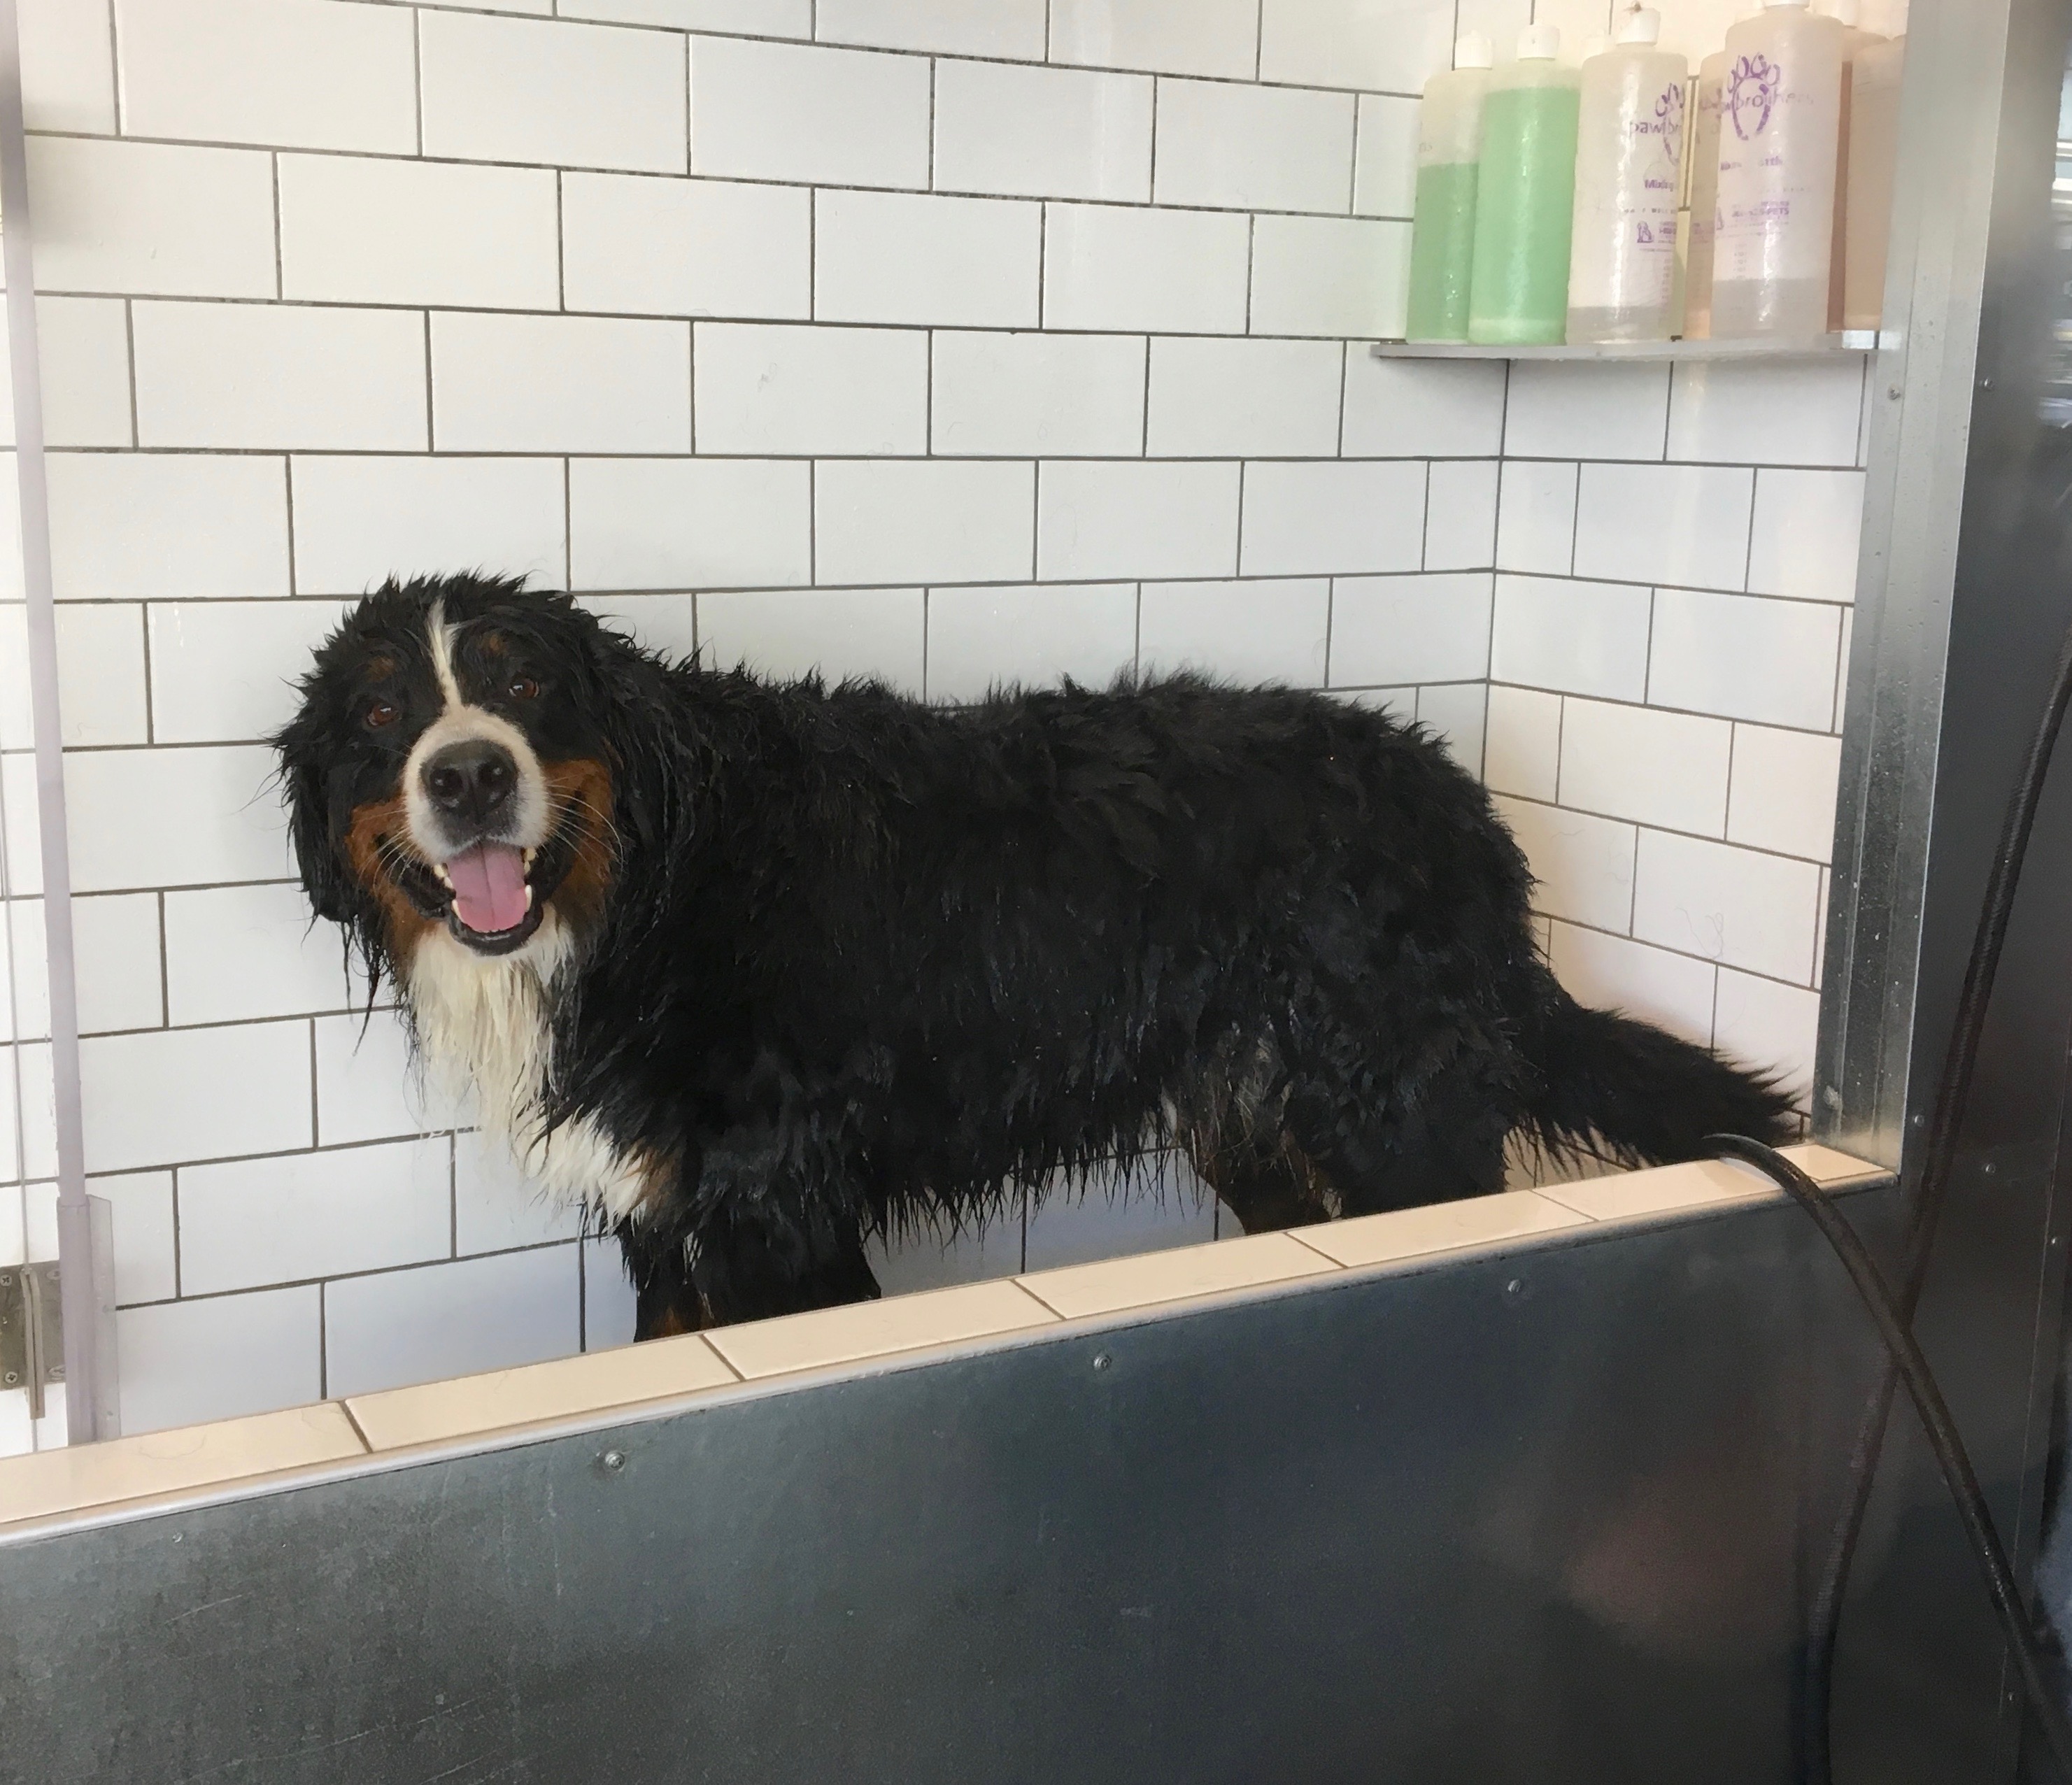 Bernese Mountain Dog In Dog Grooming Bath Looking Delighted